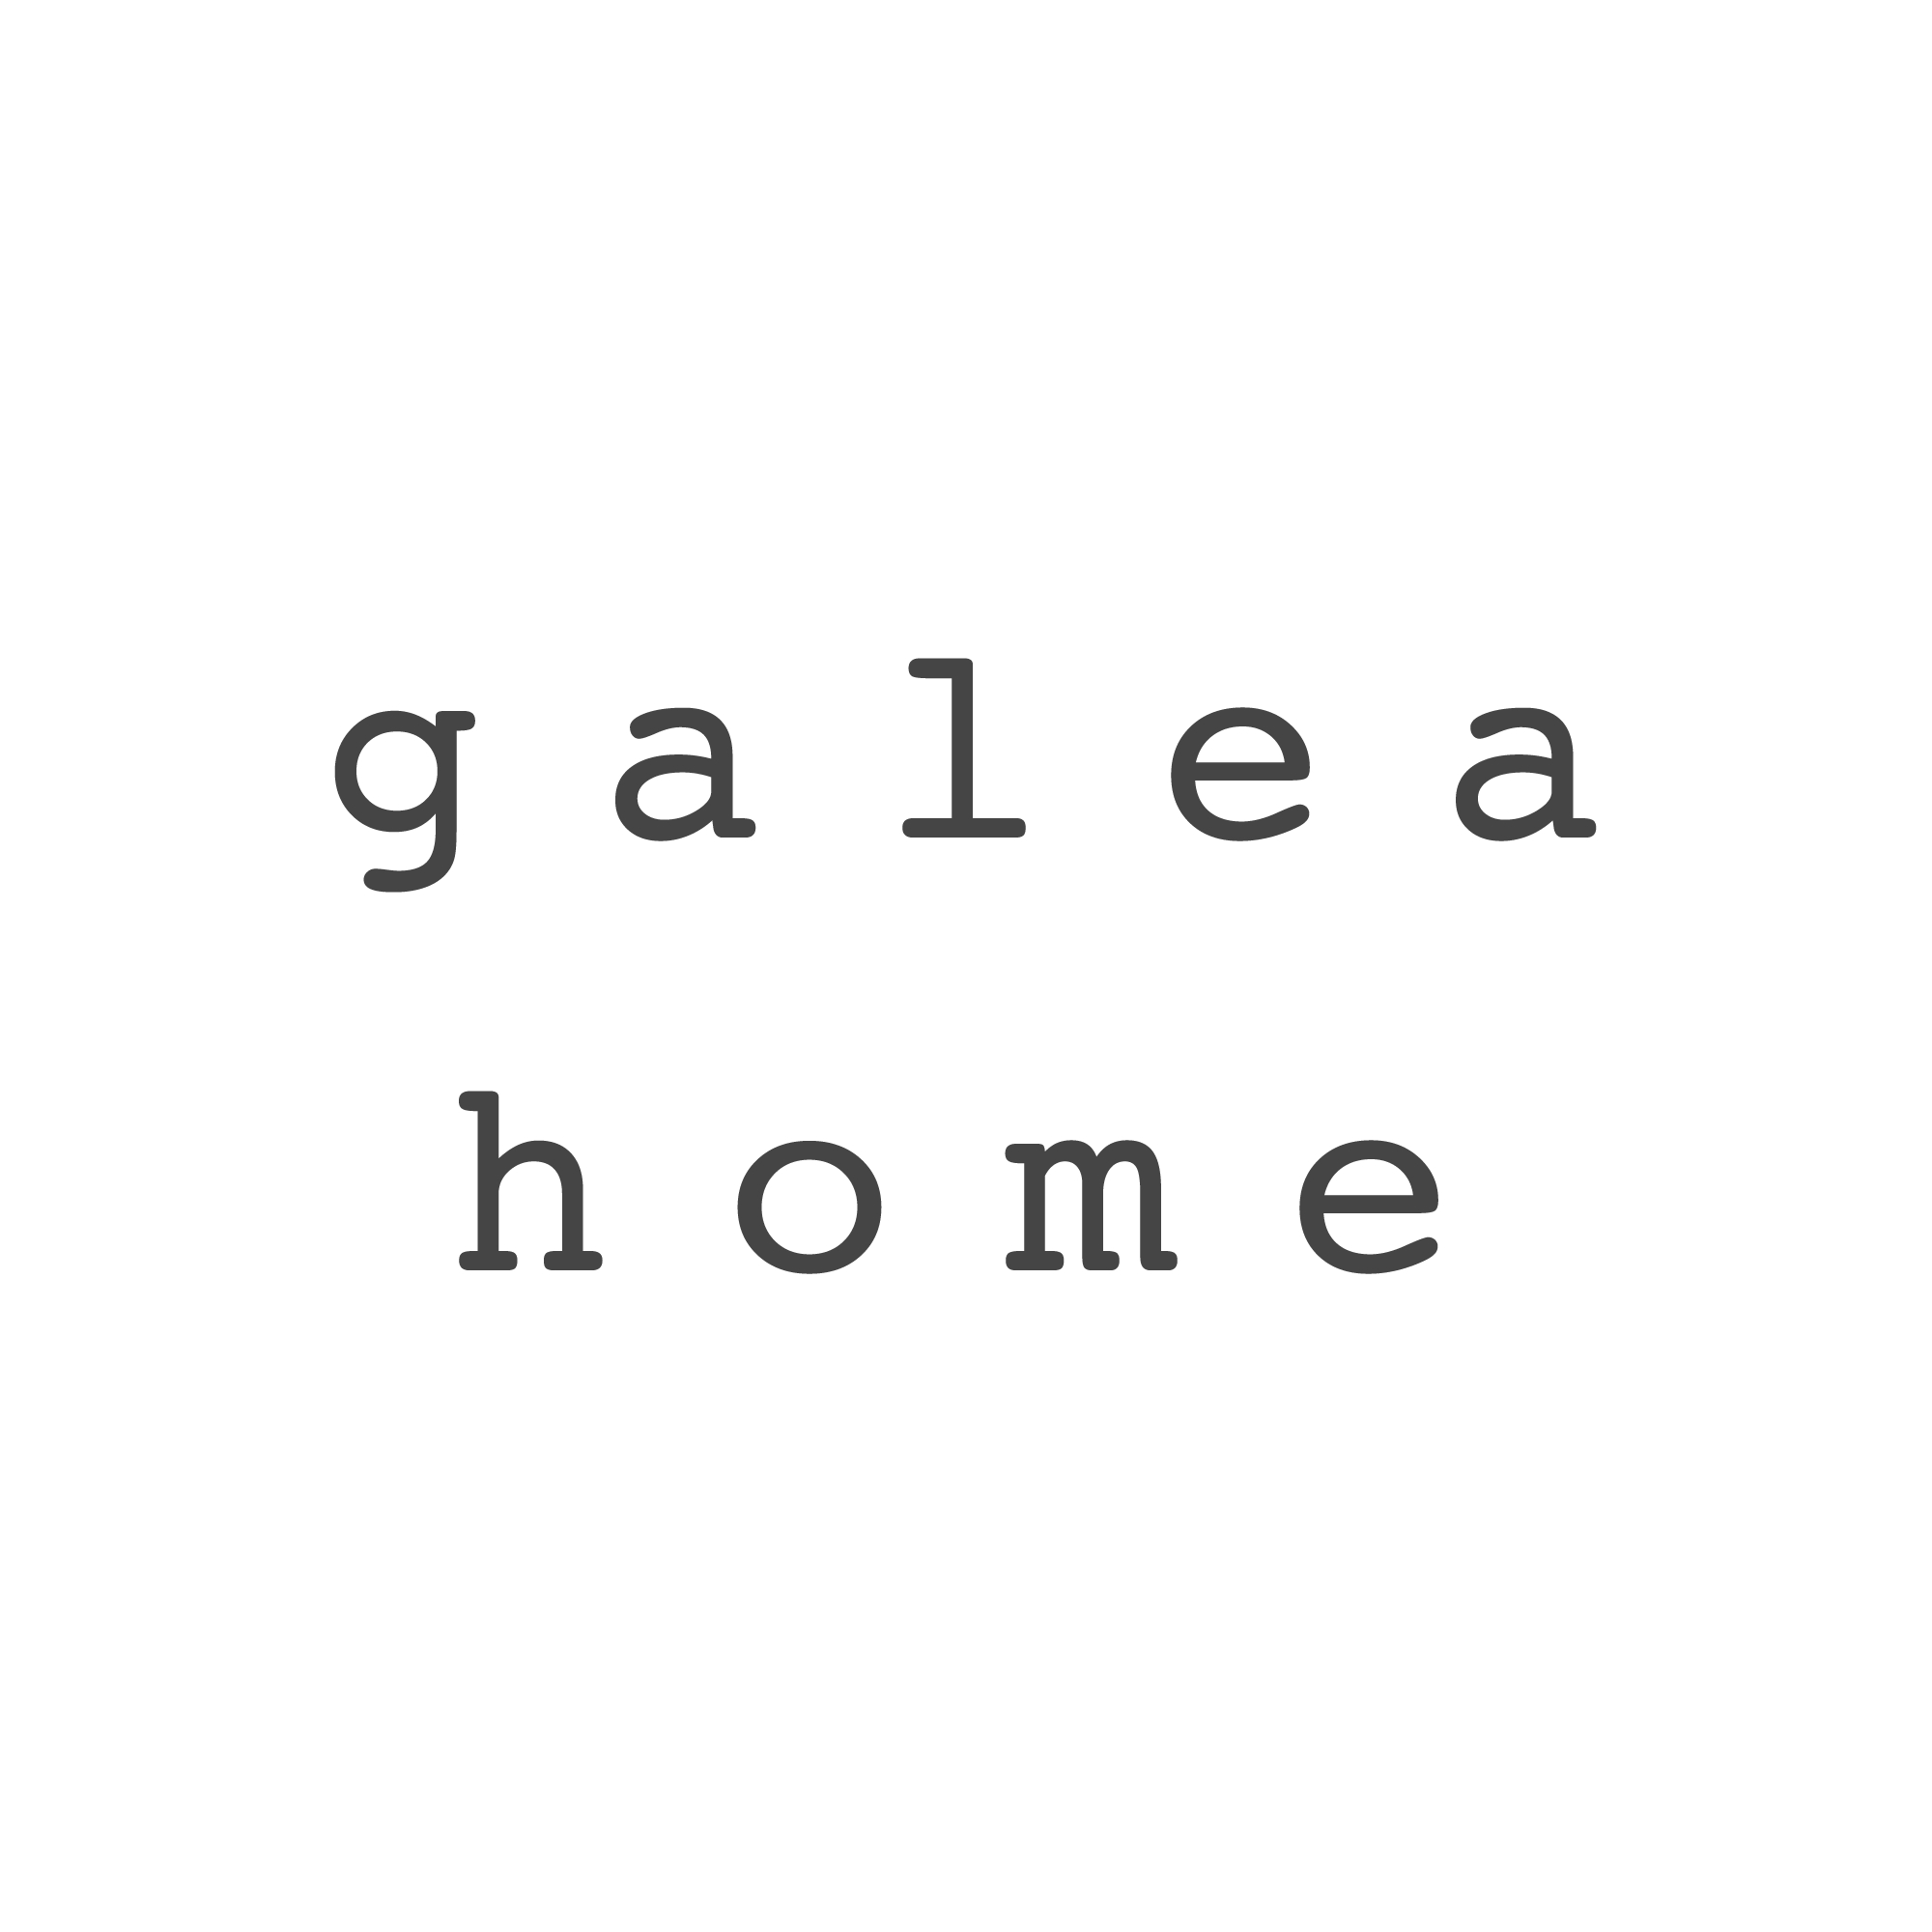 Galea Home Coupons